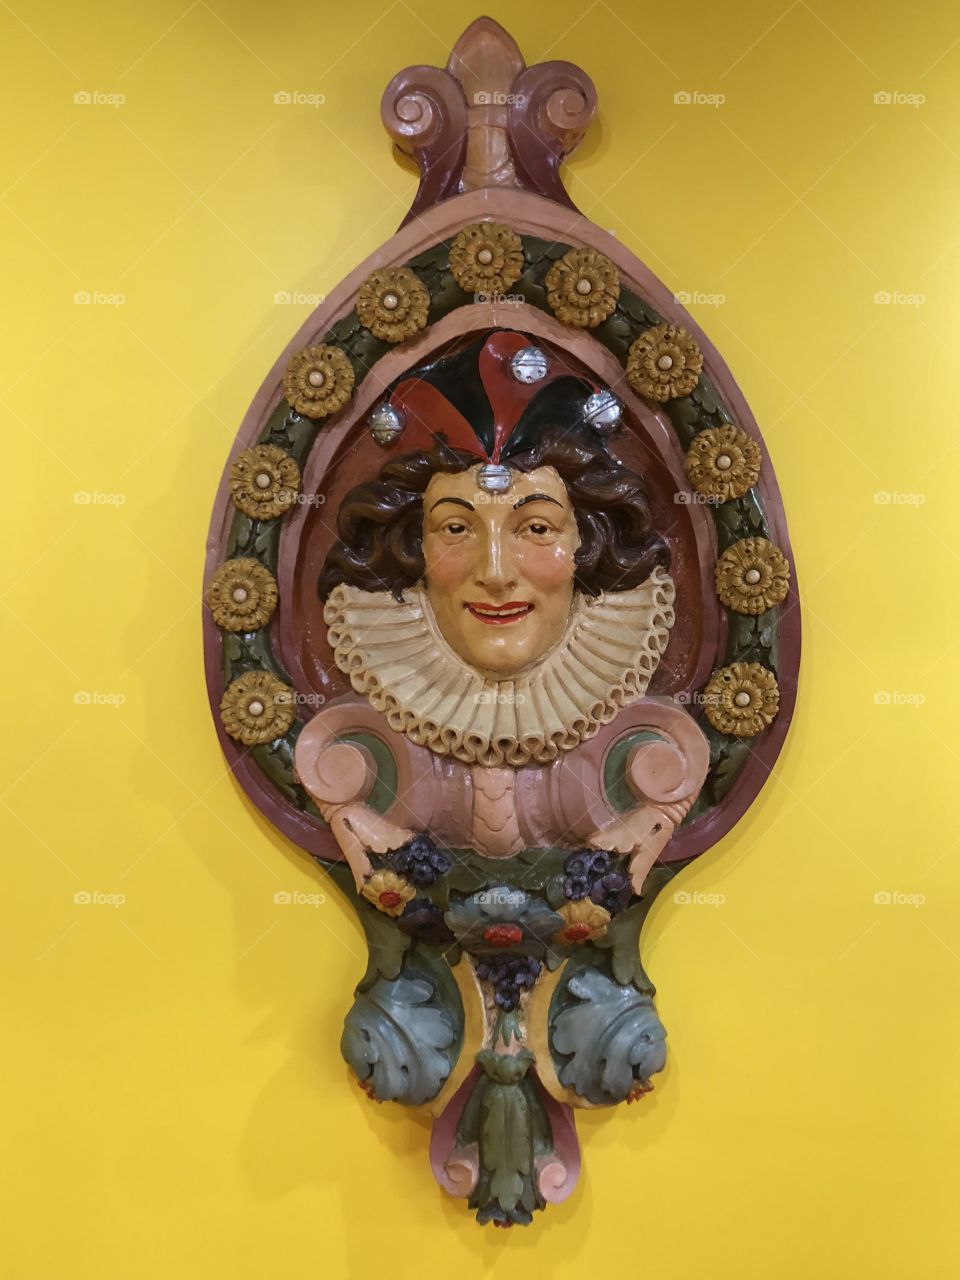 Old circus decoration in museum